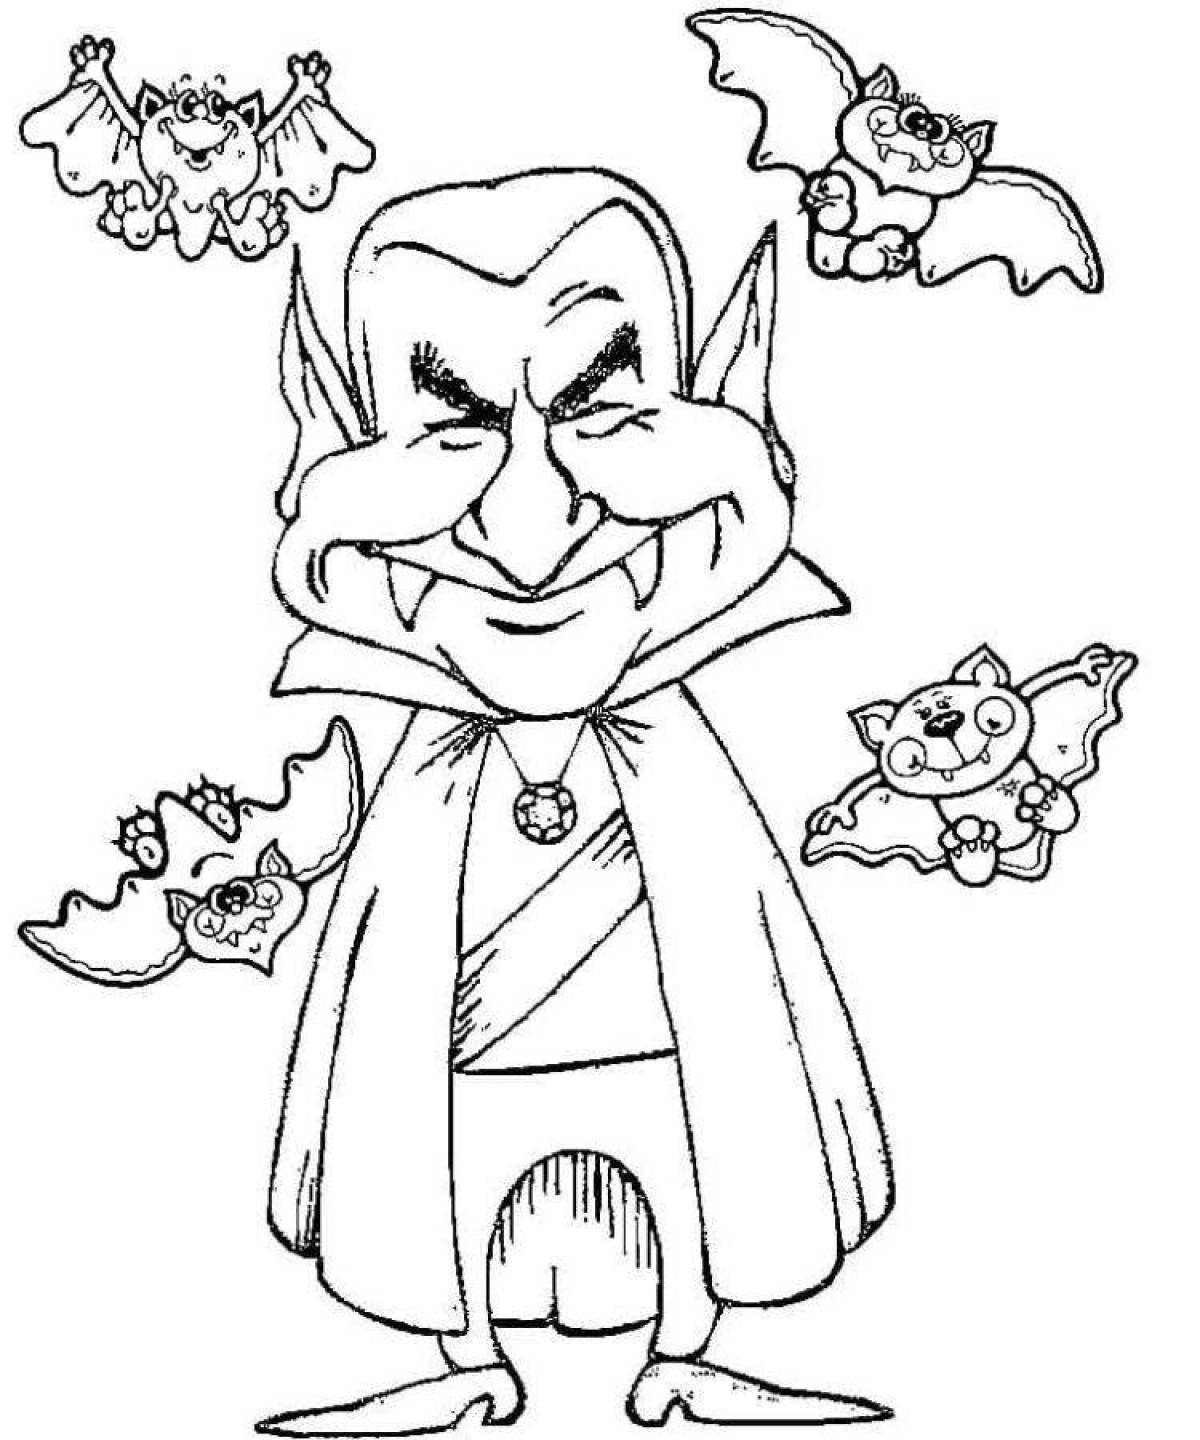 Nerving vampire coloring page